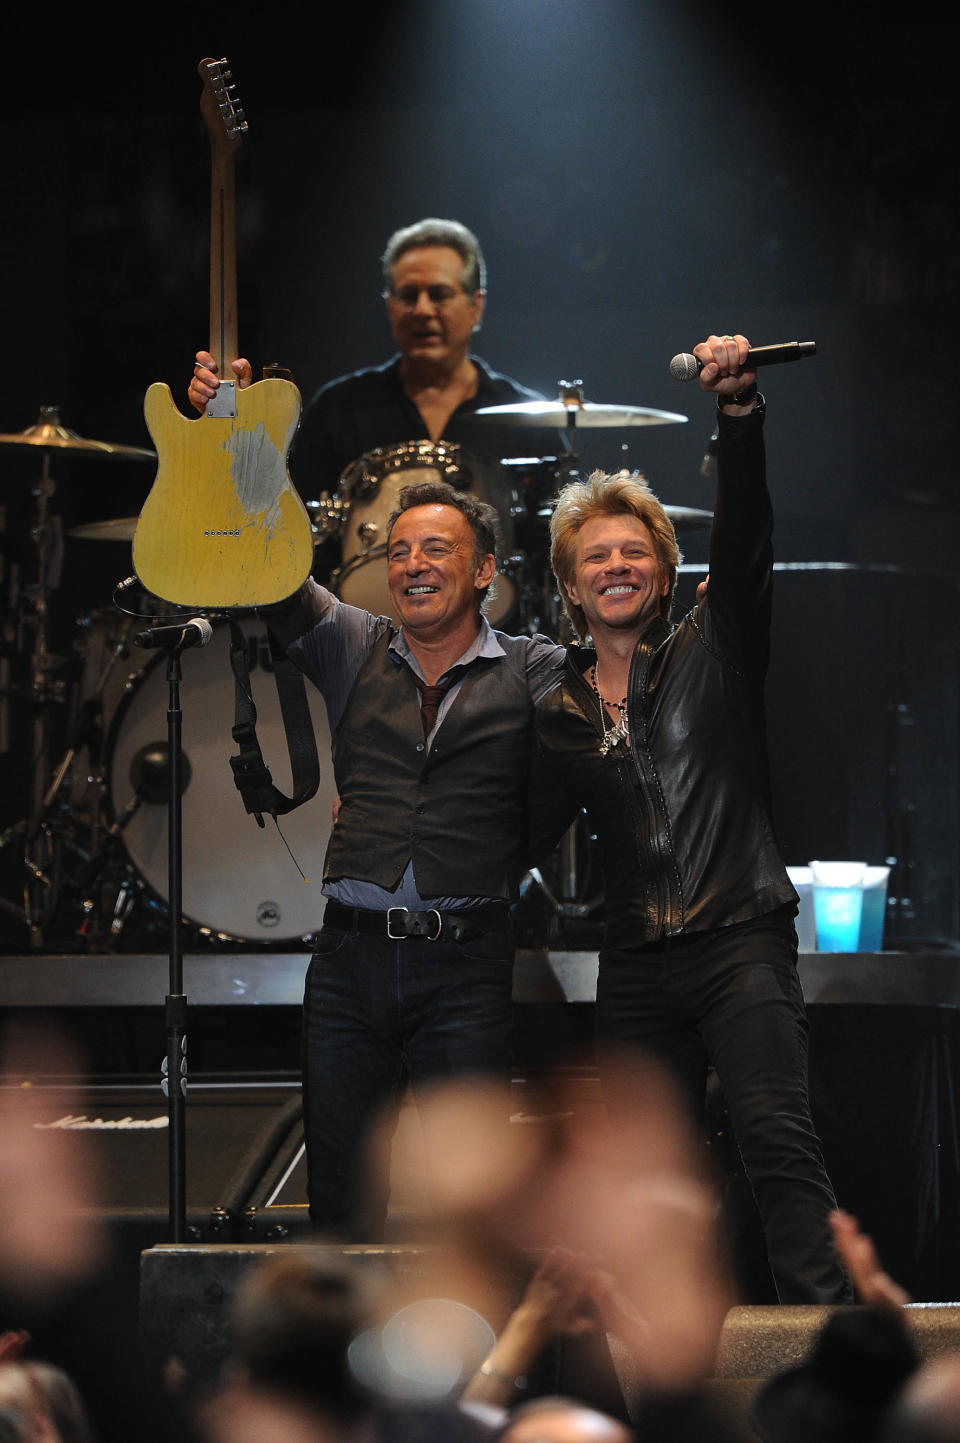 Bruce Springsteen, left, and Jon Bon Jovi onstage together, with Springsteen raising his guitar in the air and Bon Jovi raising the microphone in the air.